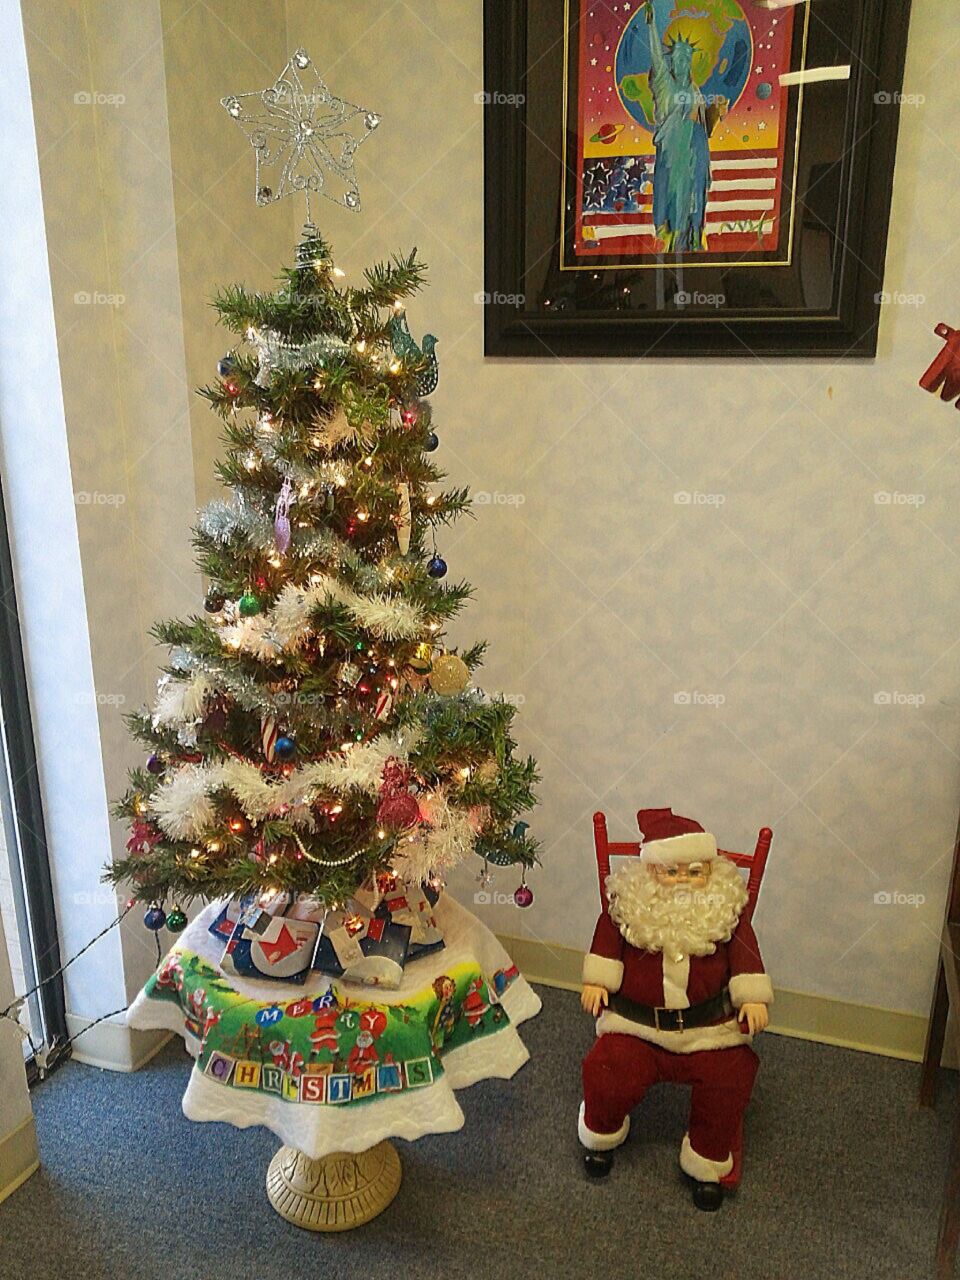 Decorations at the Dr's office...Santa must have an appt?